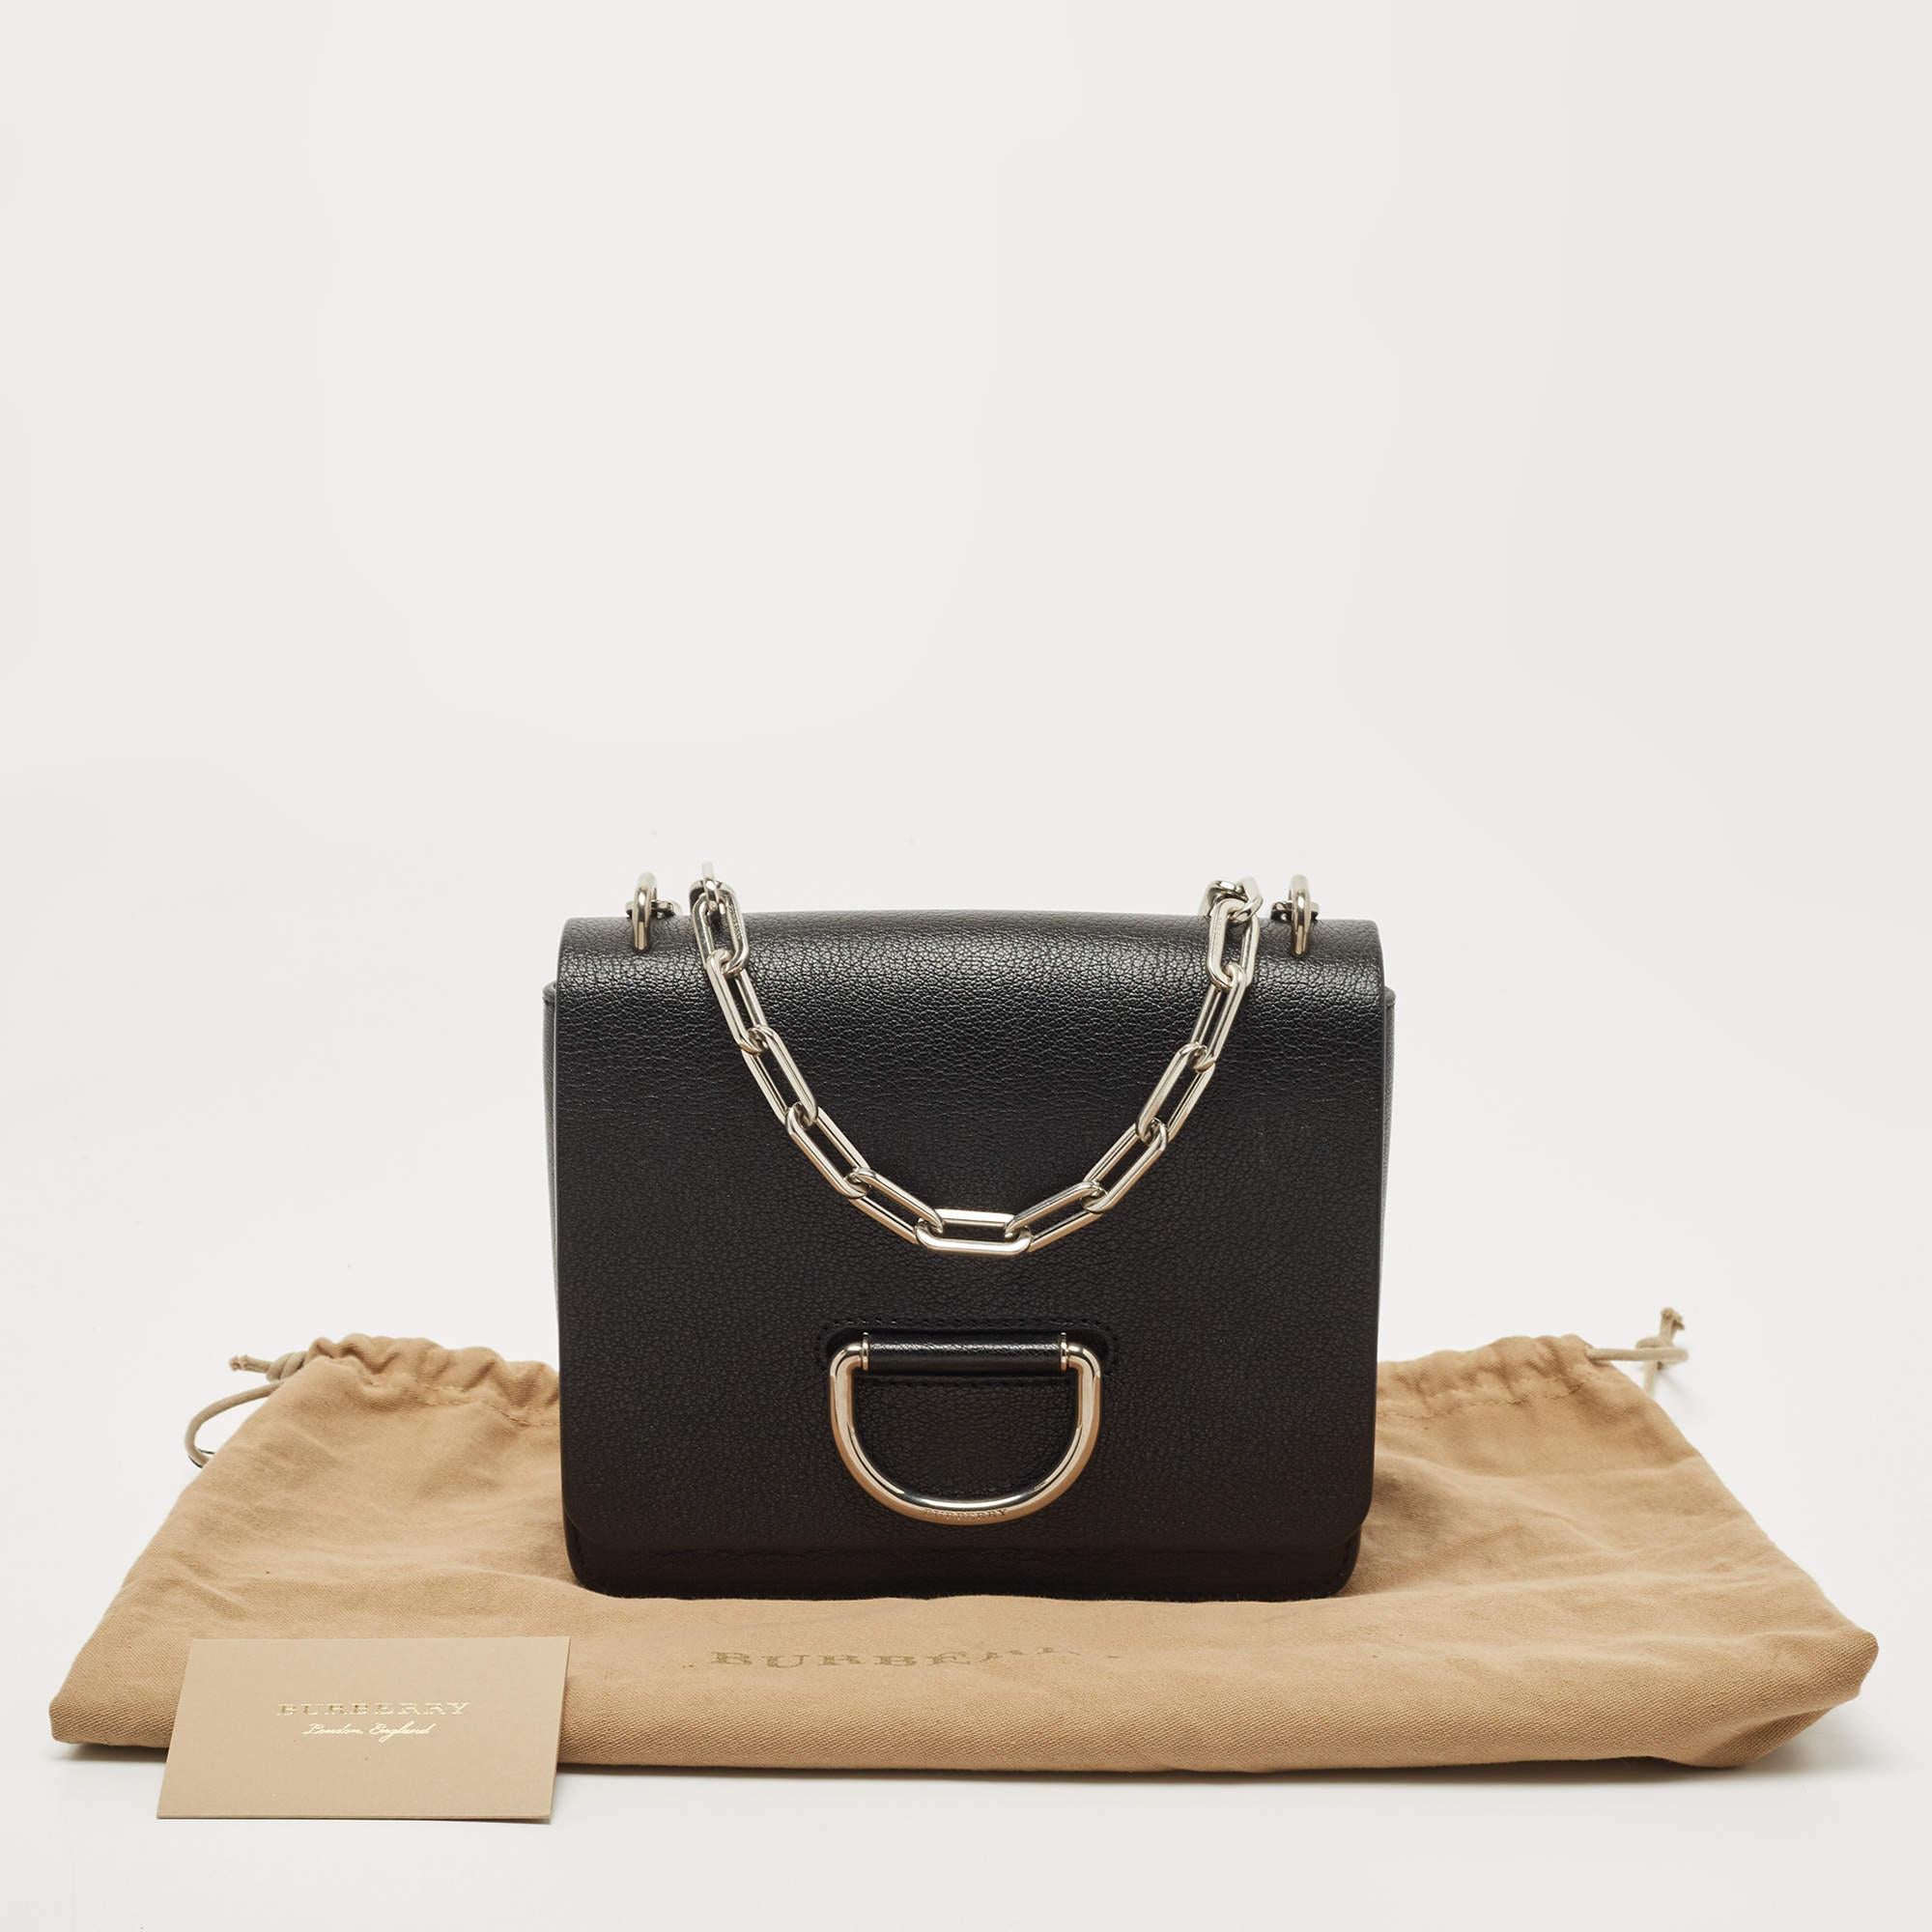 Burberry Black Leather Small D Ring Shoulder Bag 8